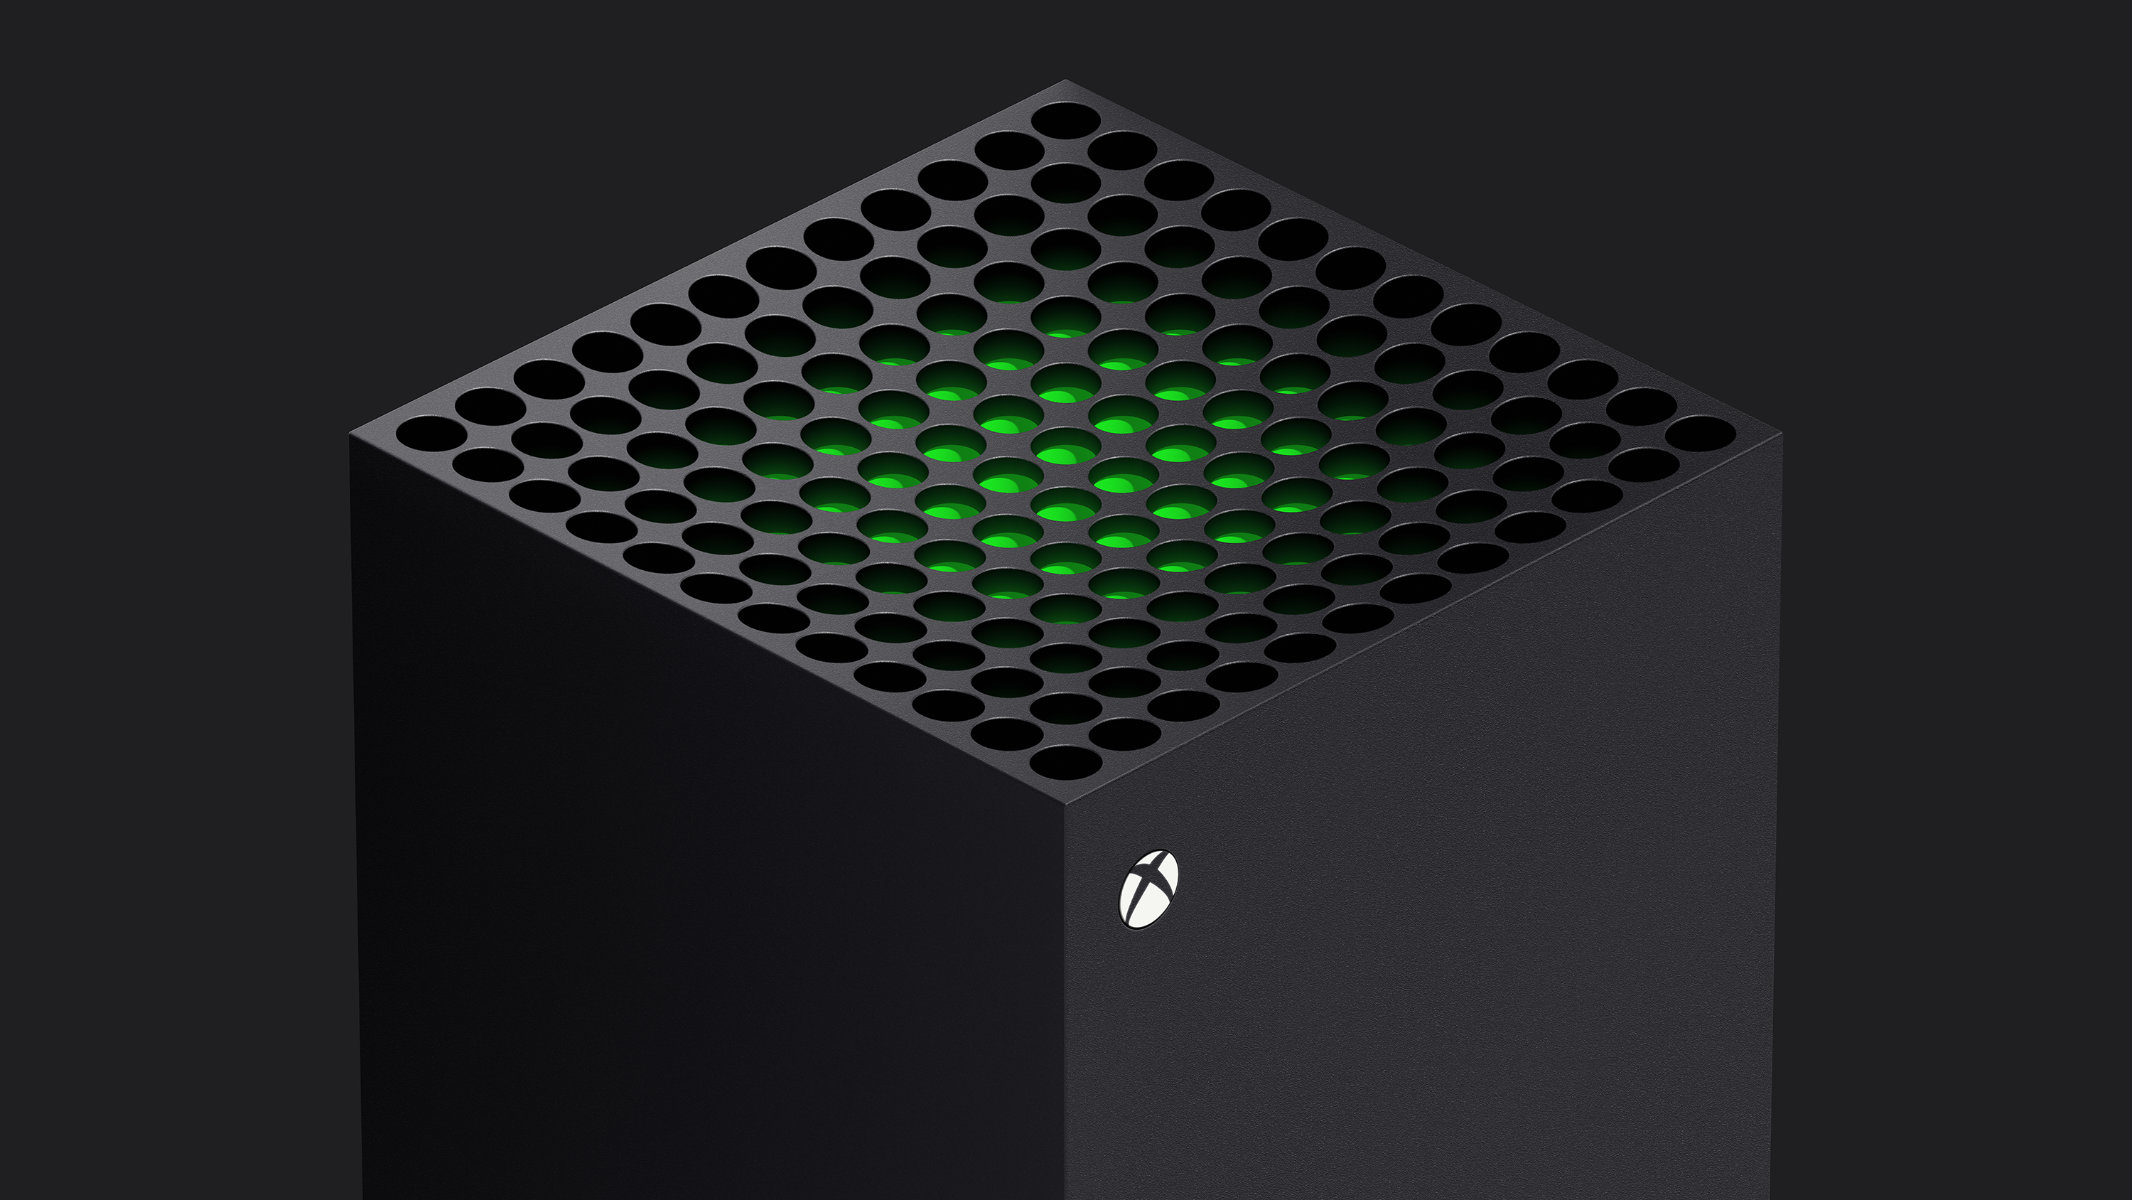 https://images.frandroid.com/wp-content/uploads/2020/03/xbox-series-x-microsoft-8.jpg